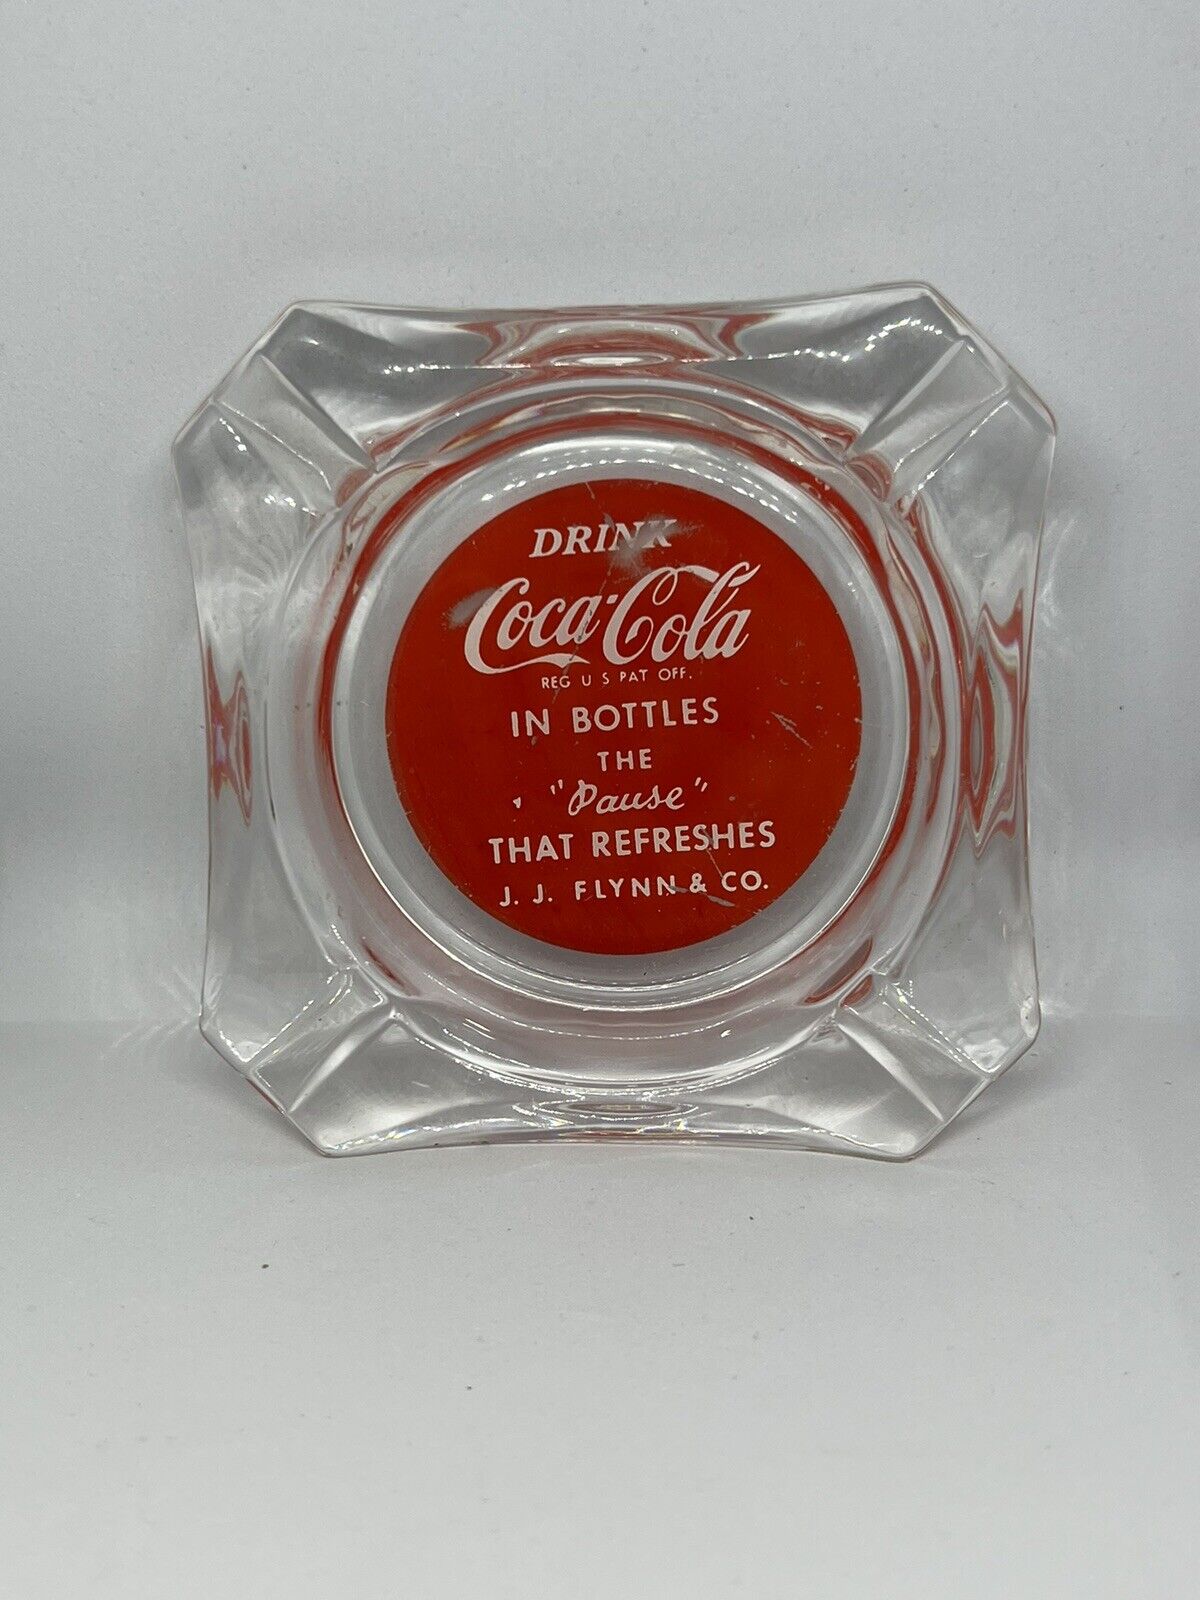 VINTAGE ‘Drink Coca Cola in Bottles’ Ashtray Rare | The “Pause” THAT REFRESHES